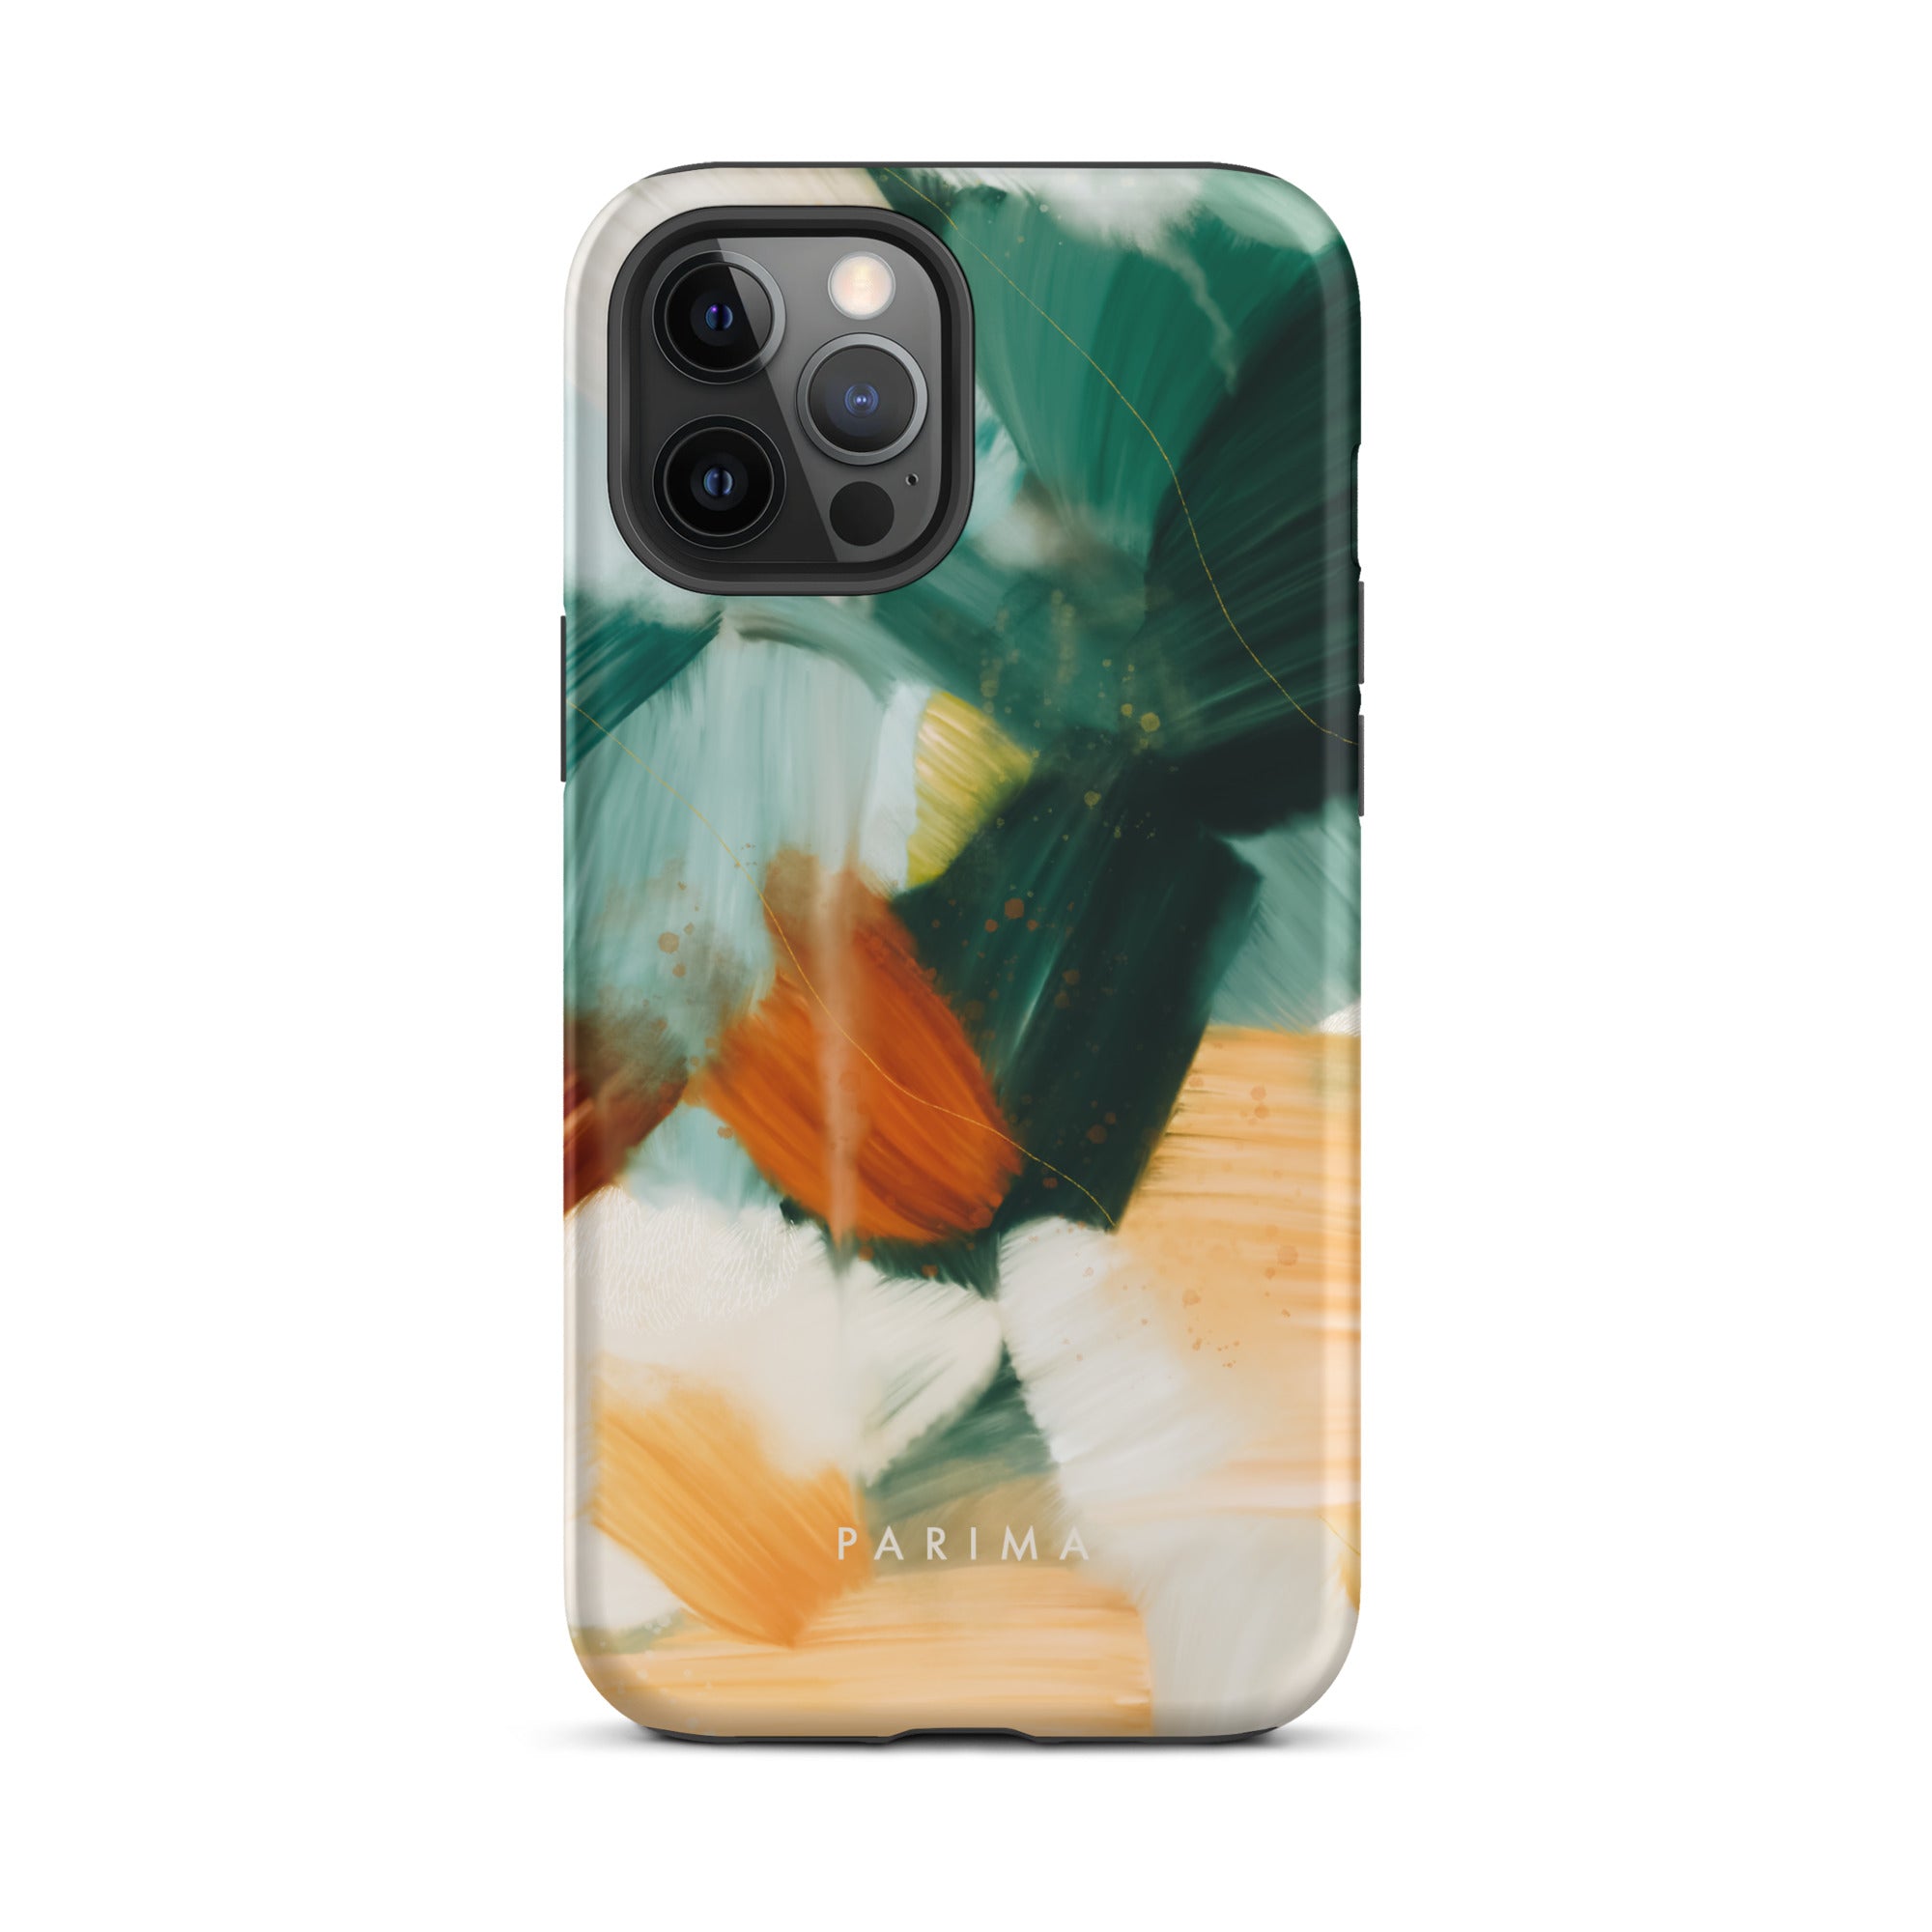 Meridian, green and orange abstract art on iPhone 12 Pro Max tough case by Parima Studio